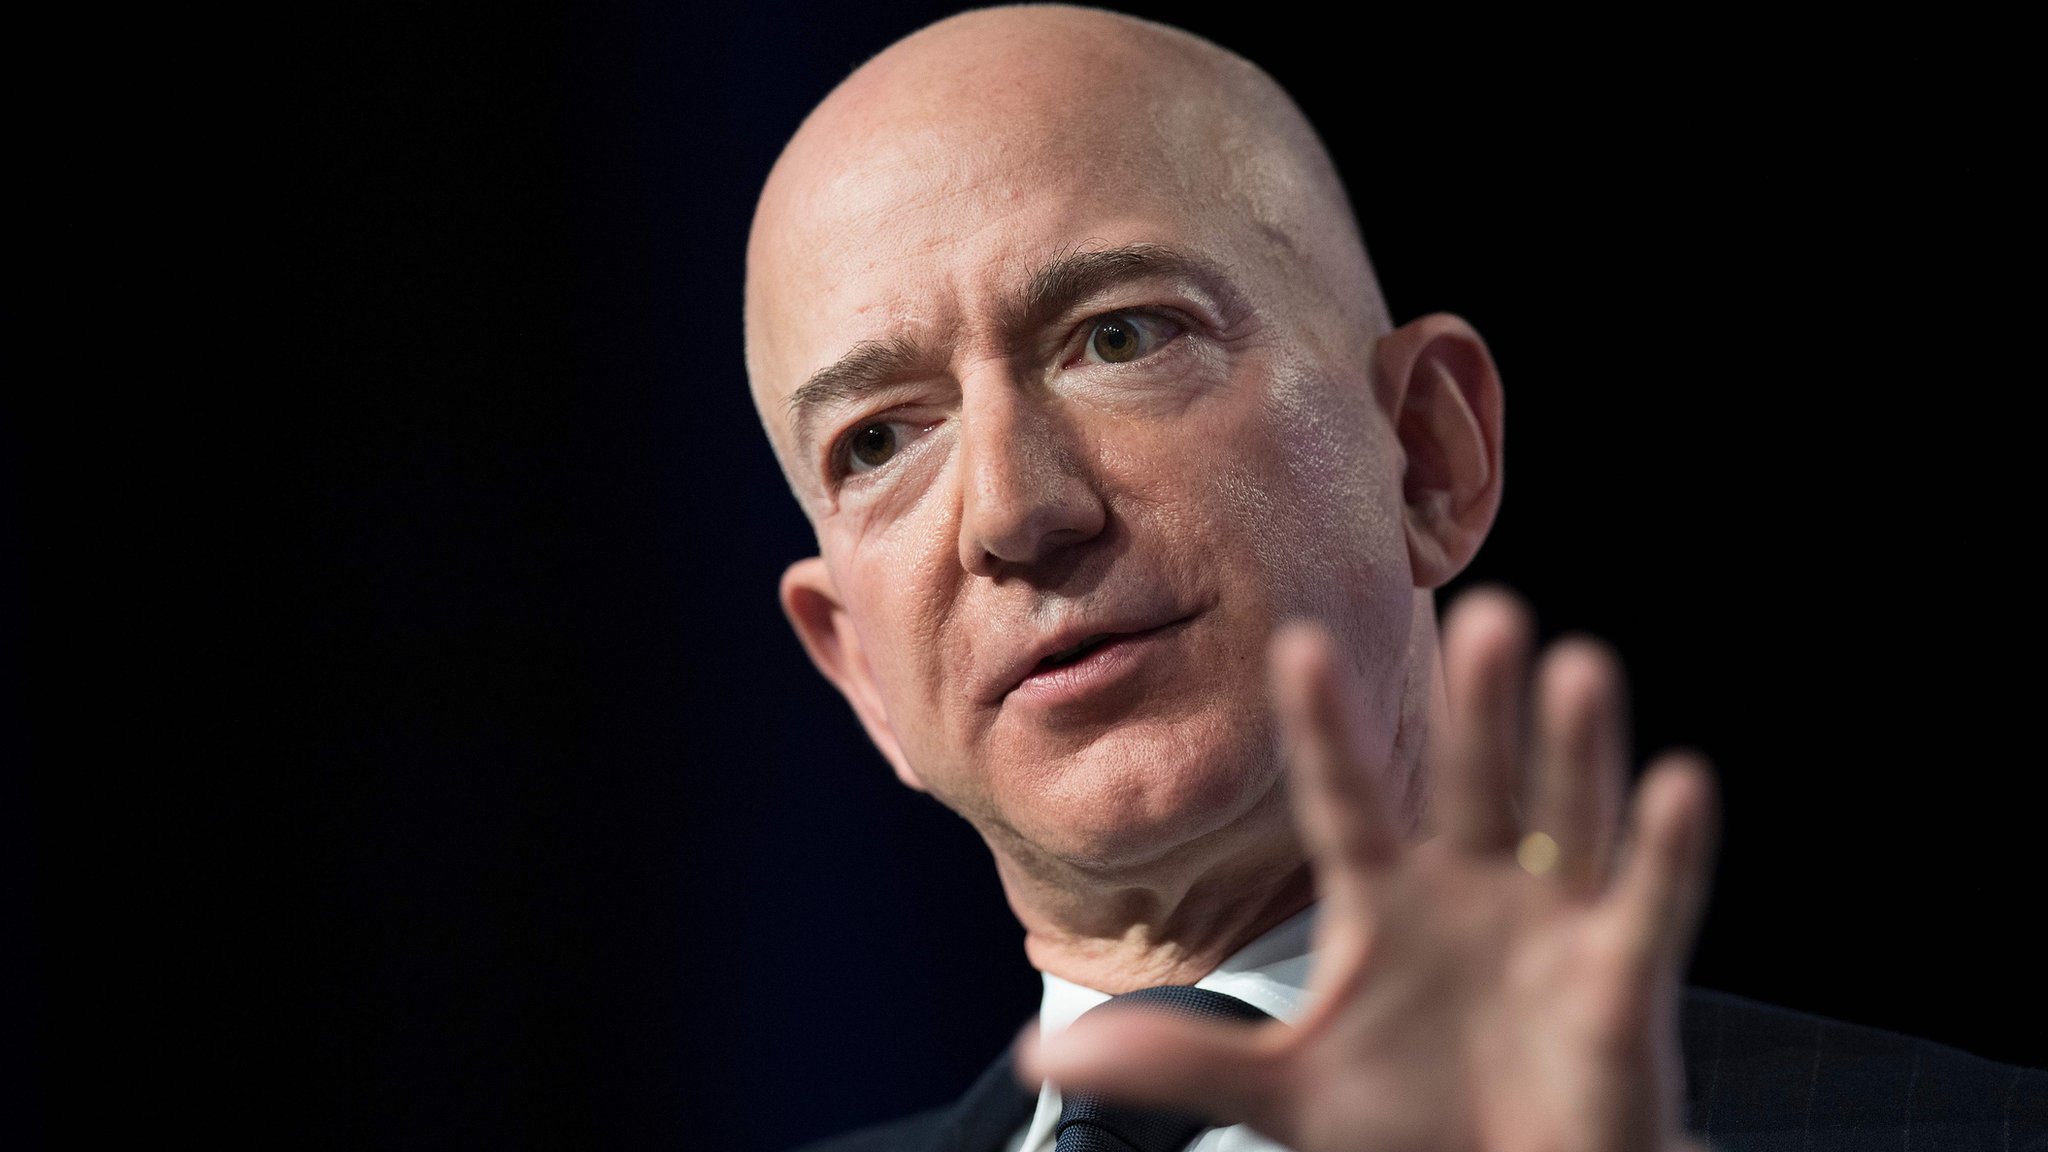 Jeff Bezos Amazon boss accuses National Enquirer of blackmail picture